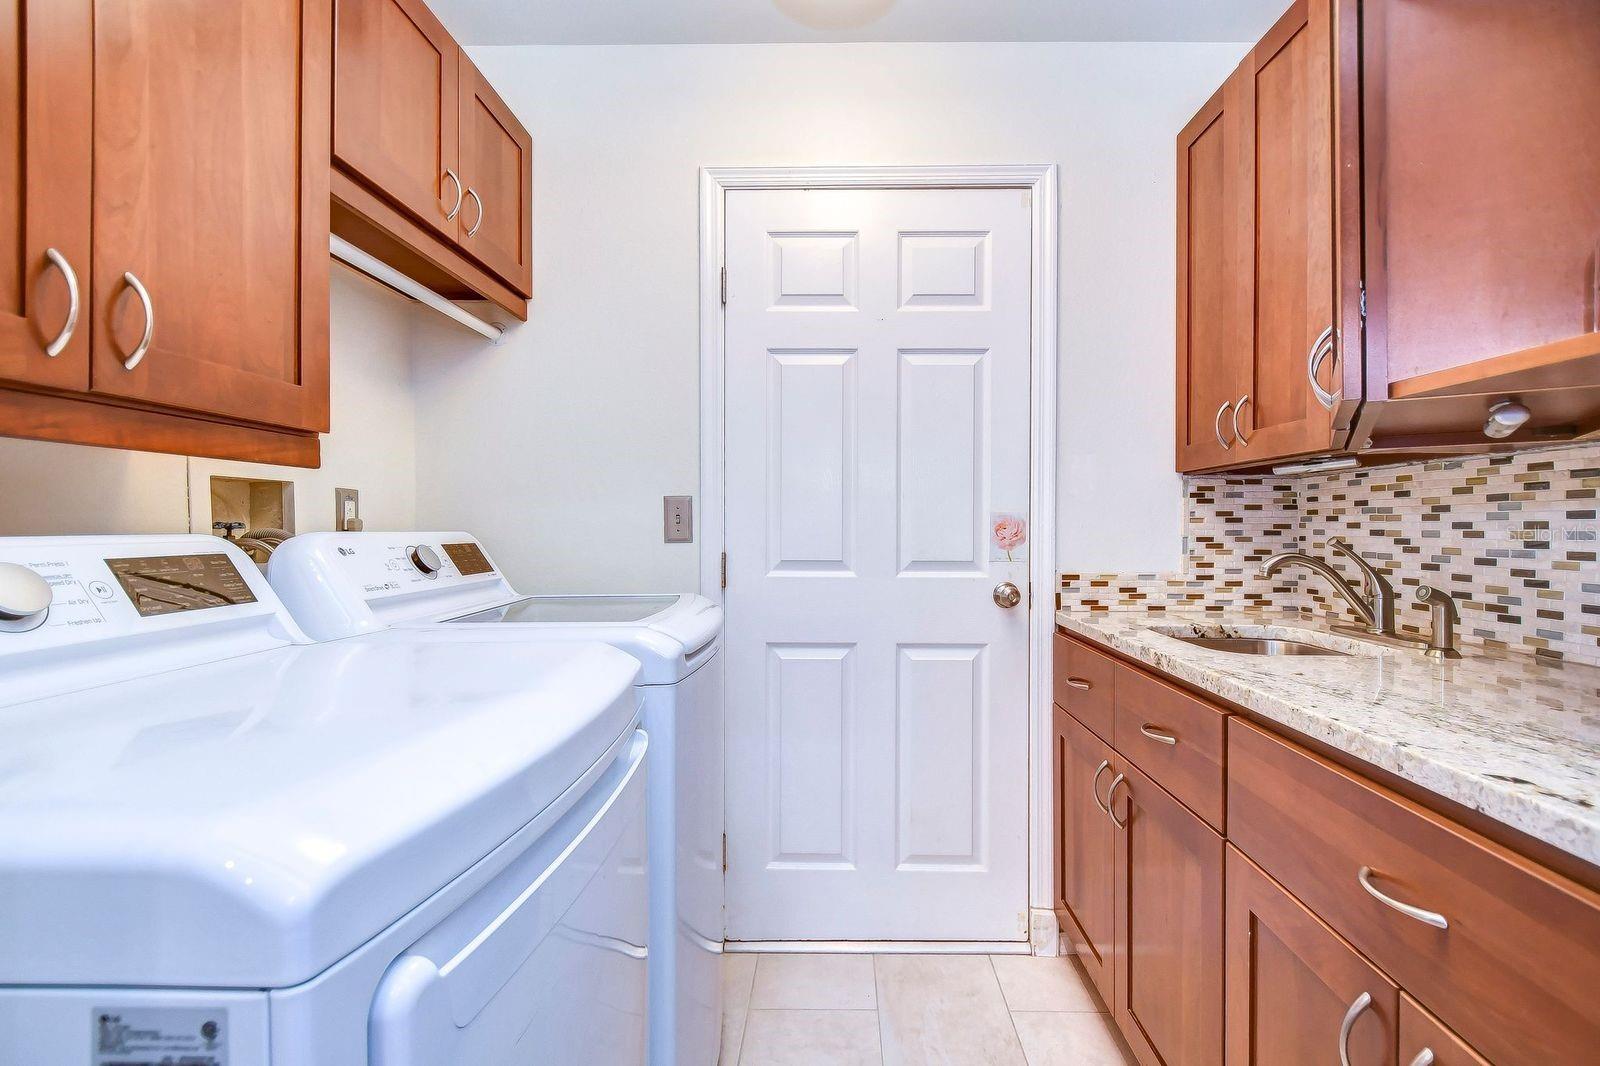 The laundry room is between the garage and kitchen and has so much storage!